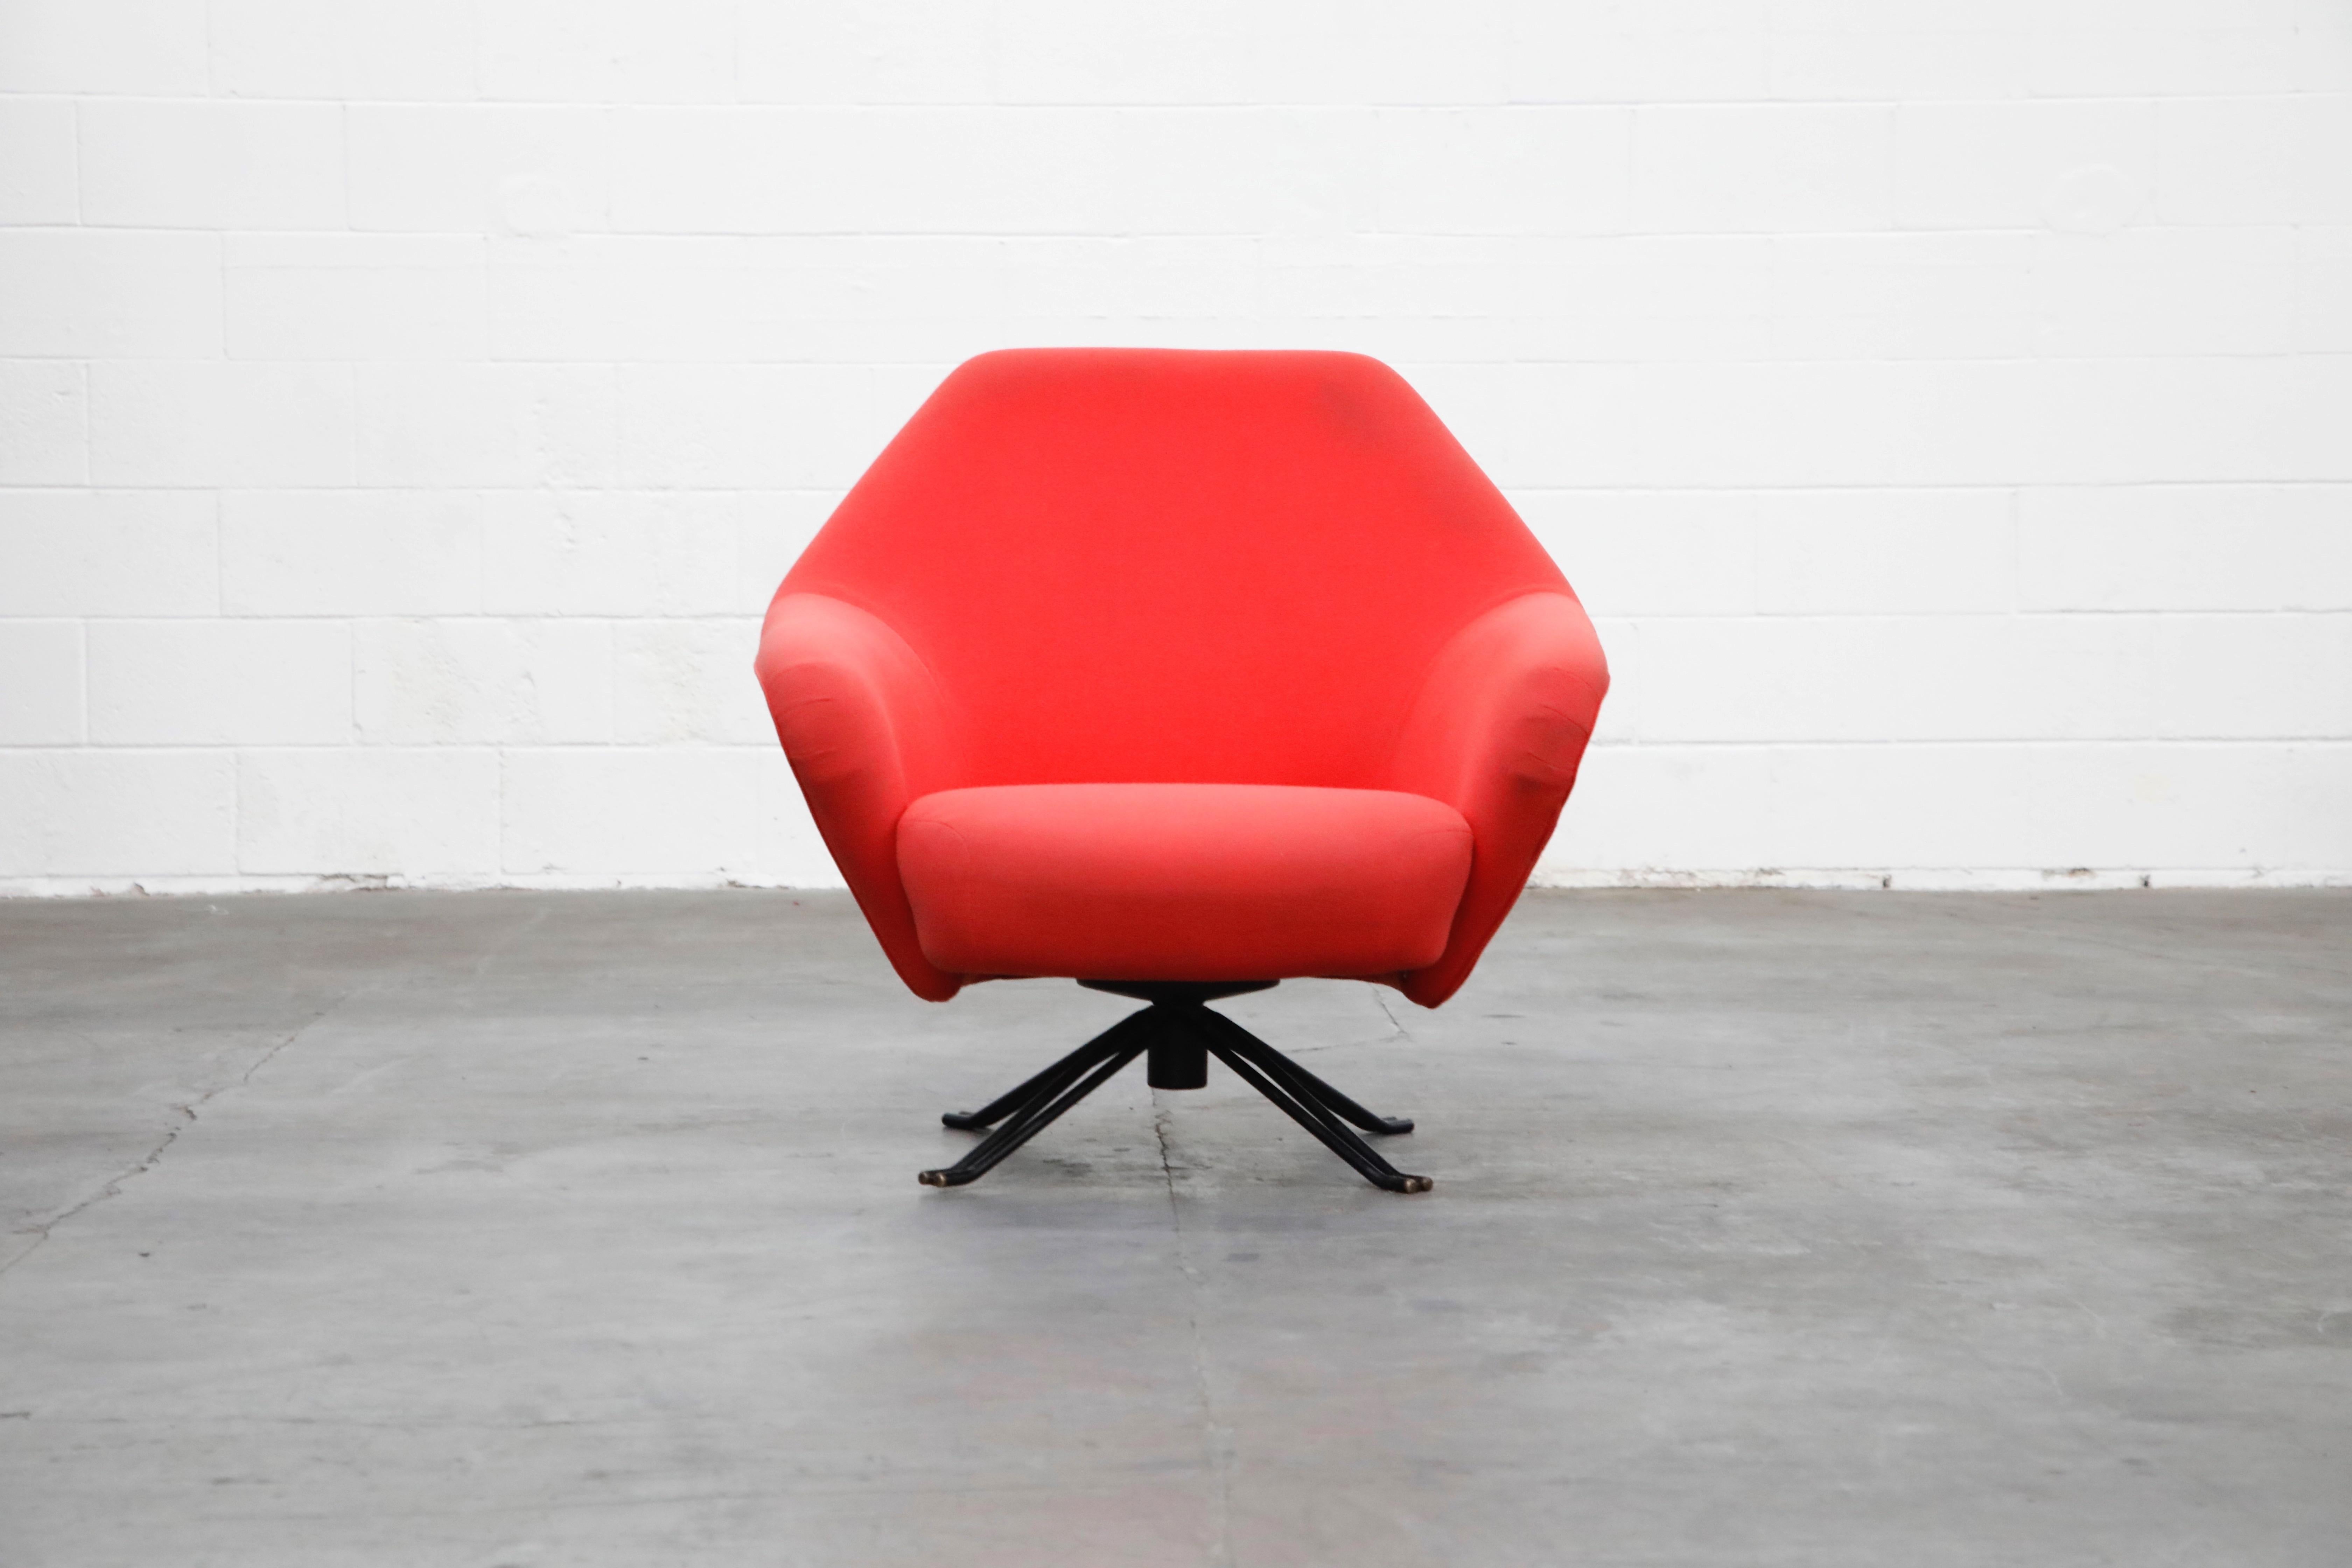 Such a collectible and rare piece of 1950s Italian design, this P32 Memory Swivel Armchair by Osvaldo Borsani for Tecno is in its original red felt wool fabric upholstery. Signed with a brass Techno emblem on the side of the chair. Great option for